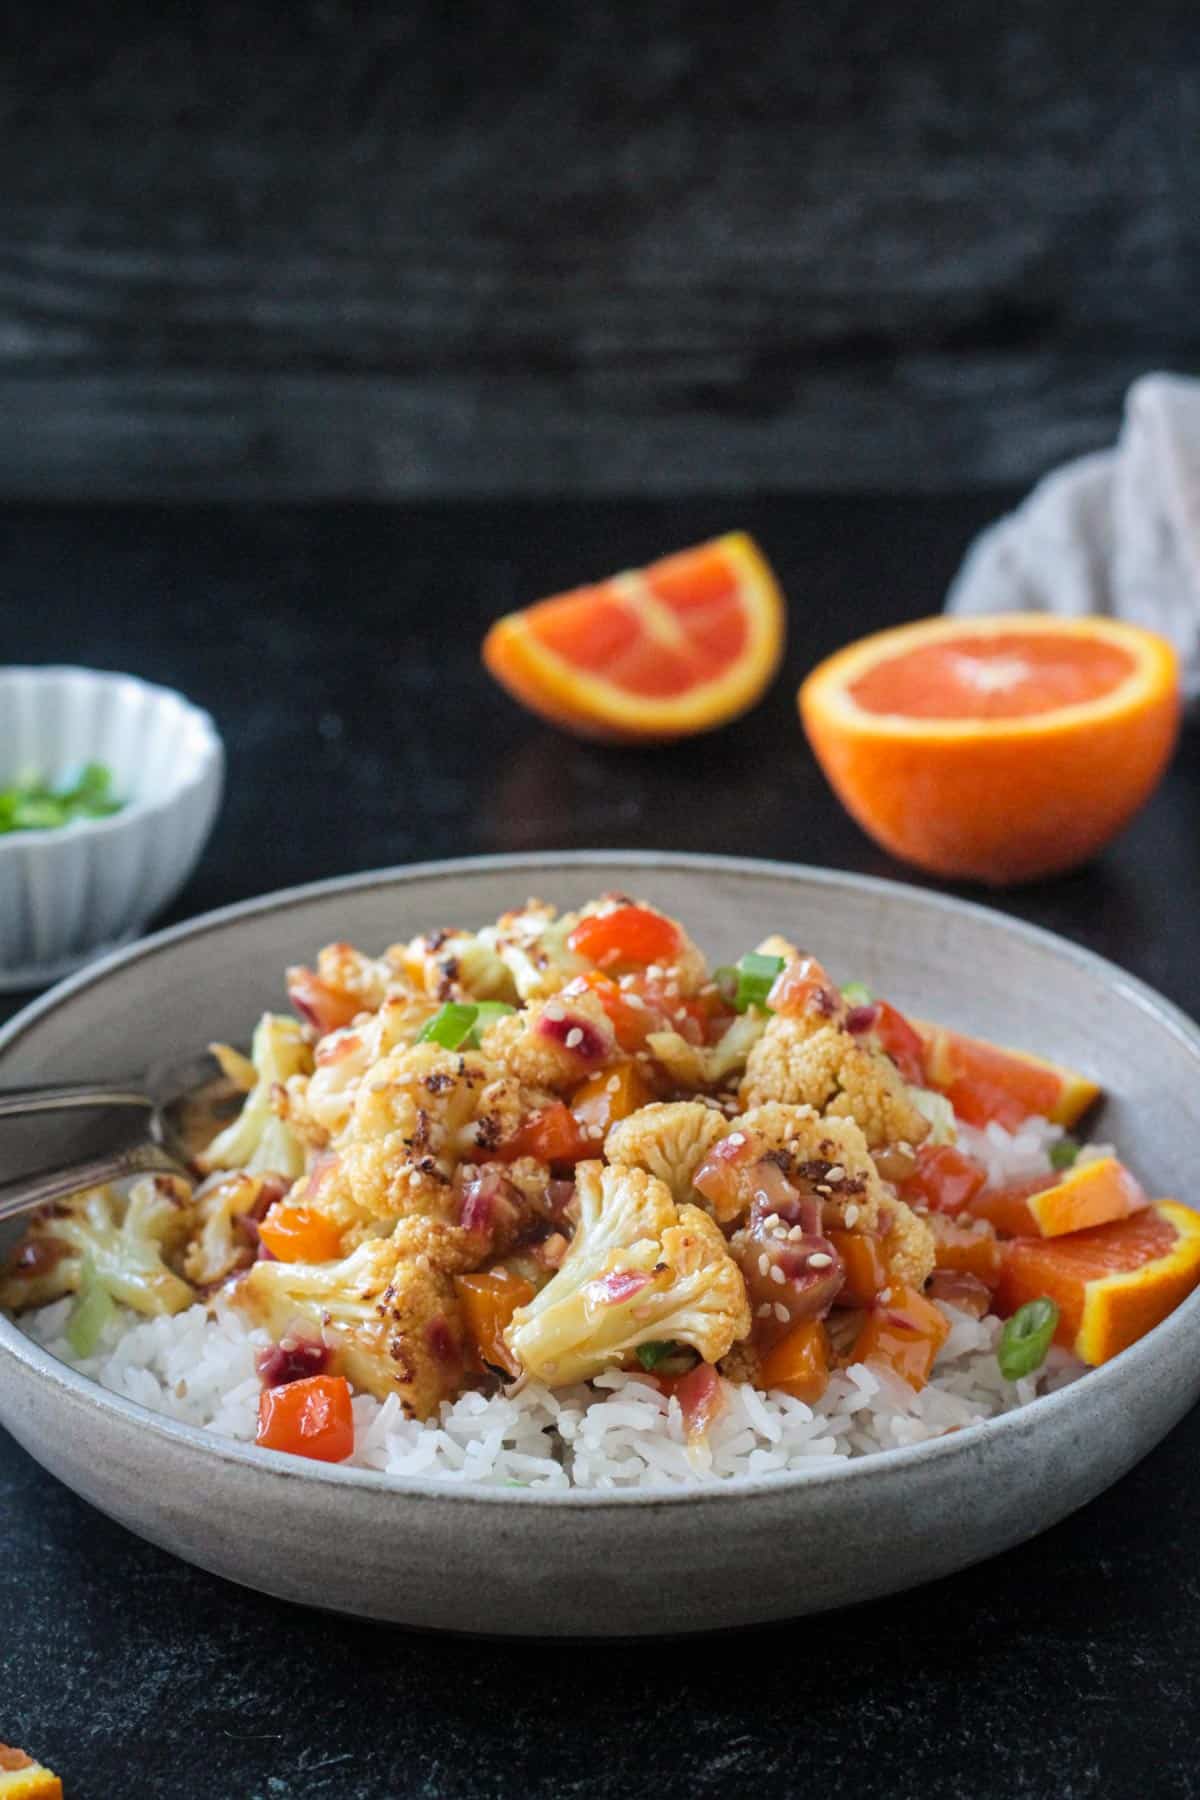 Rice topped with vegan orange cauliflower in a gray flat bowl.